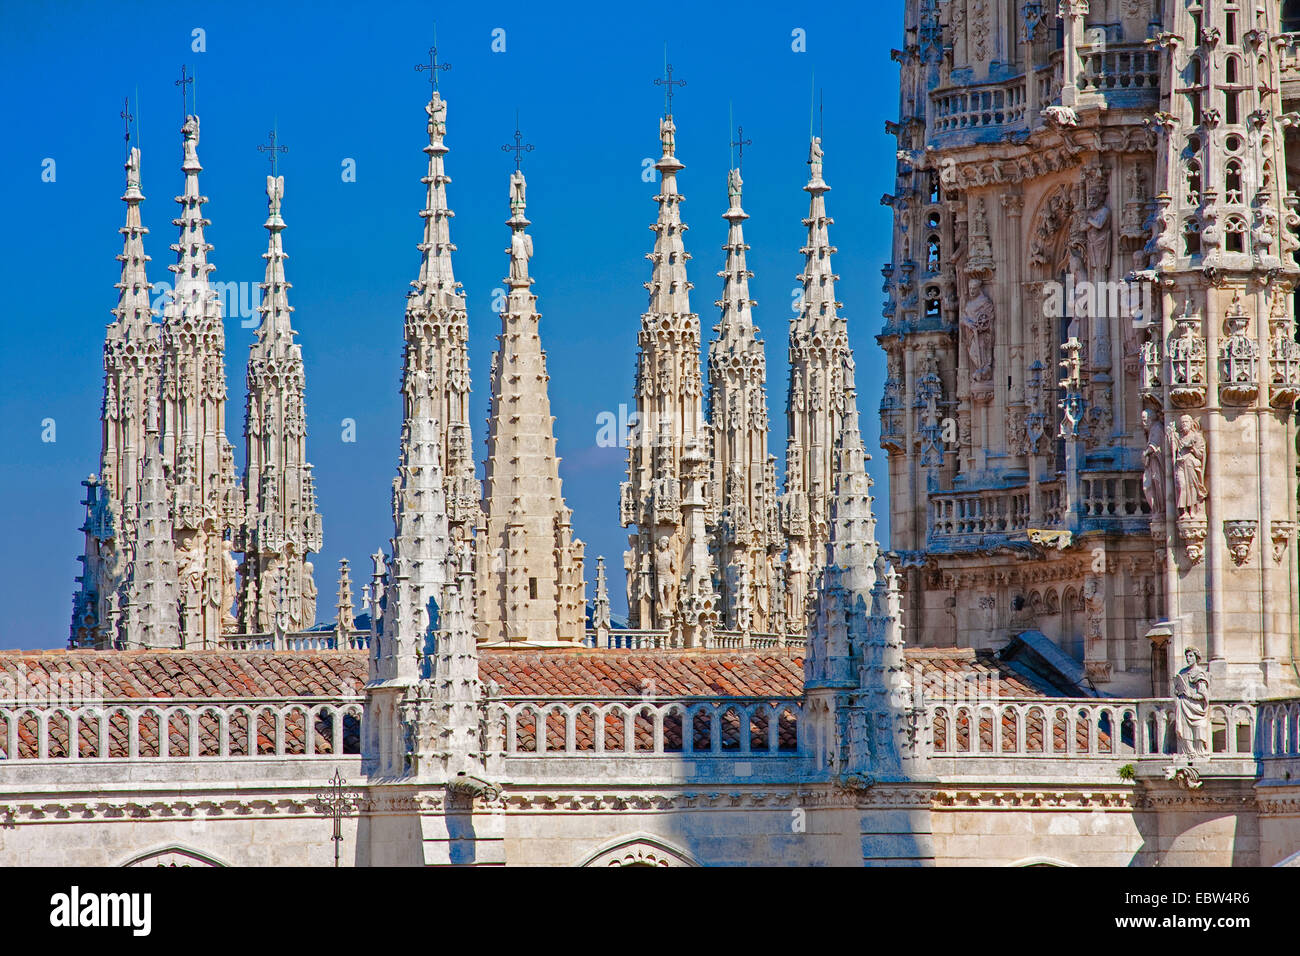 pinnacles at the cathedral roof, Spain, Kastilien und Le¾n, Burgos Stock Photo